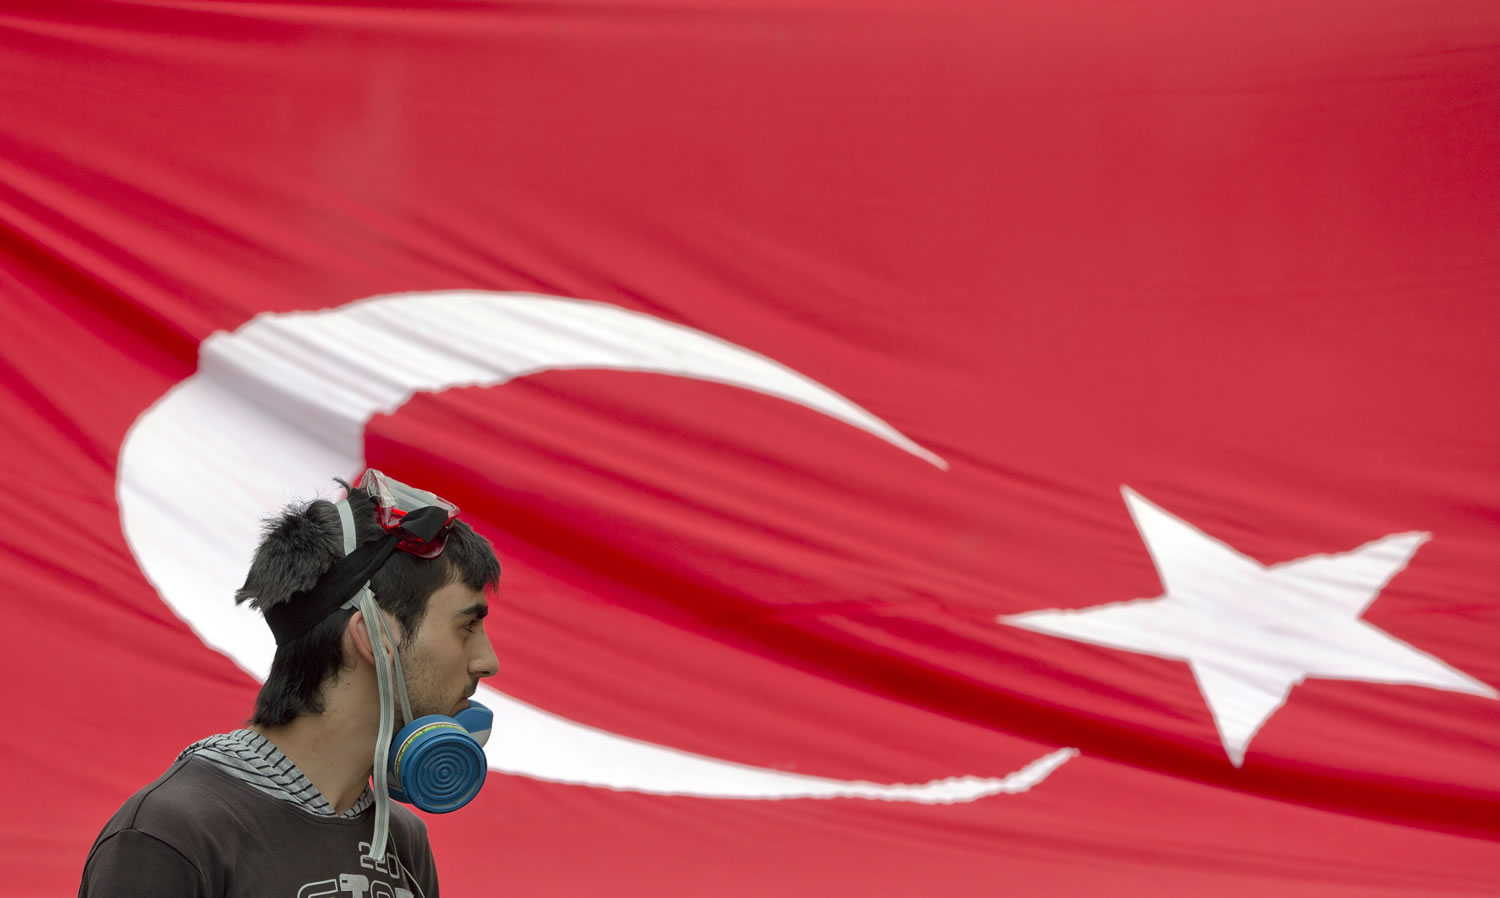 A protester with a gas mask stands in front of a Turkish flag near a barricade on the edge of Gezi Park on Wednesday in Istanbul, Turkey.